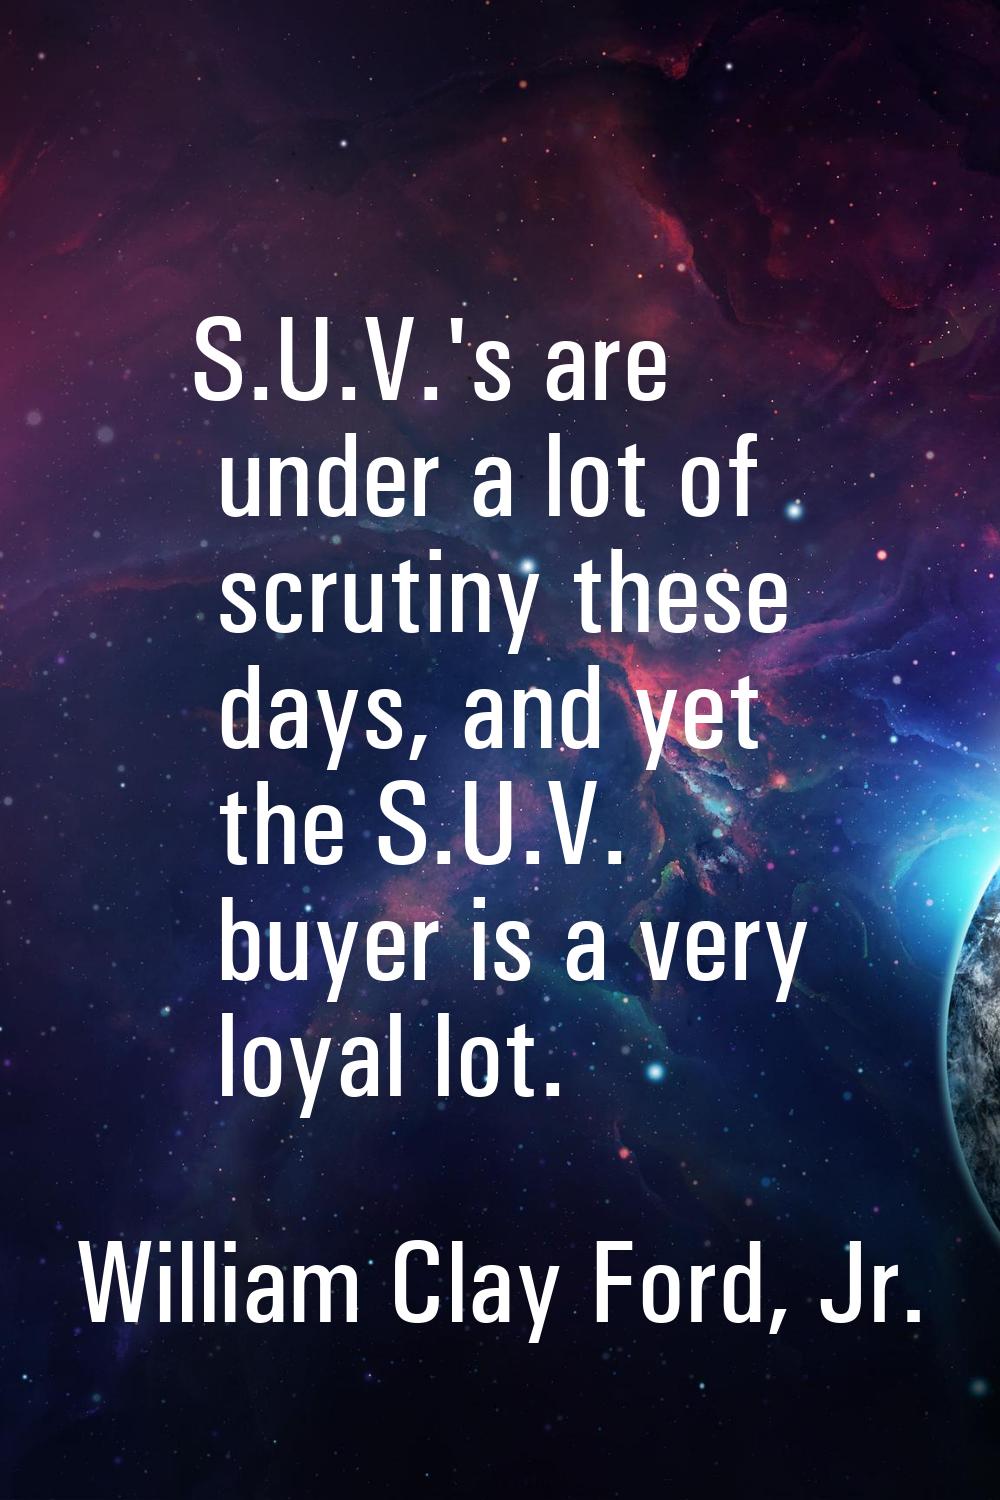 S.U.V.'s are under a lot of scrutiny these days, and yet the S.U.V. buyer is a very loyal lot.